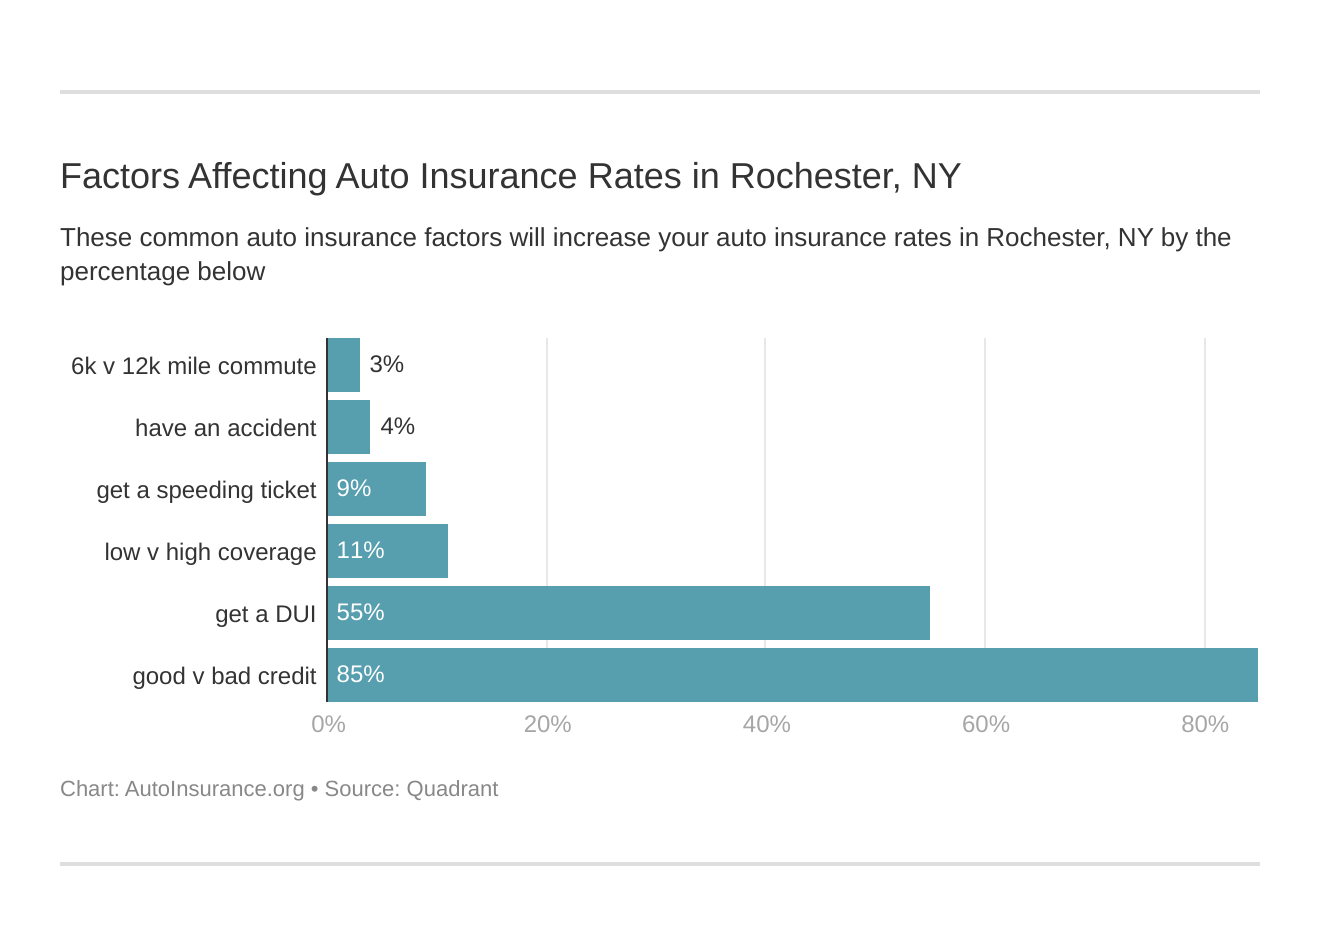 Factors Affecting Auto Insurance Rates in Rochester, NY